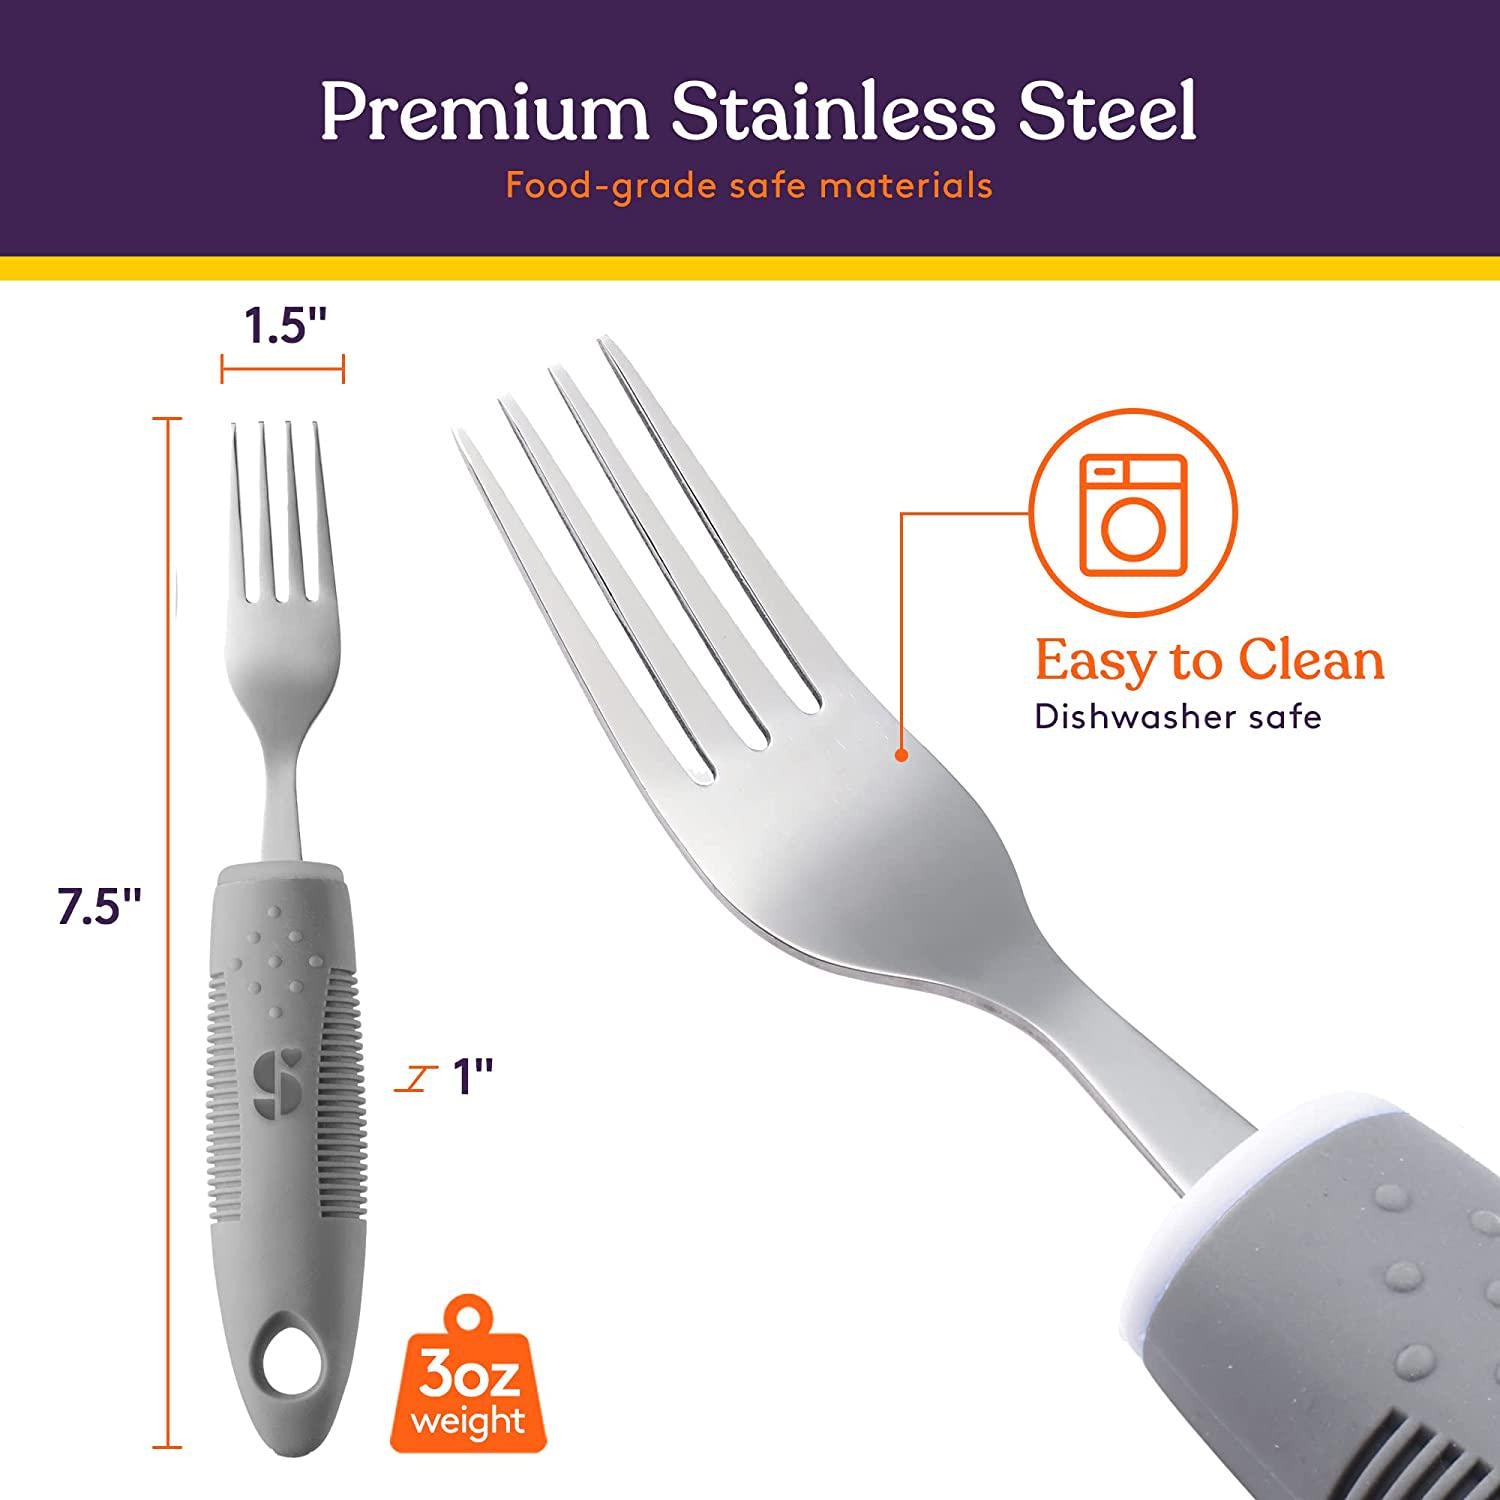 Special Supplies, (Grey) - Adaptive Utensils (4-Piece Kitchen Set) Wide, Non-Weighted, Non-Slip Handles for Hand Tremors, Arthritis, Parkinson's or Elderly use Stainless Steel Knife, Fork, Spoons - Grey